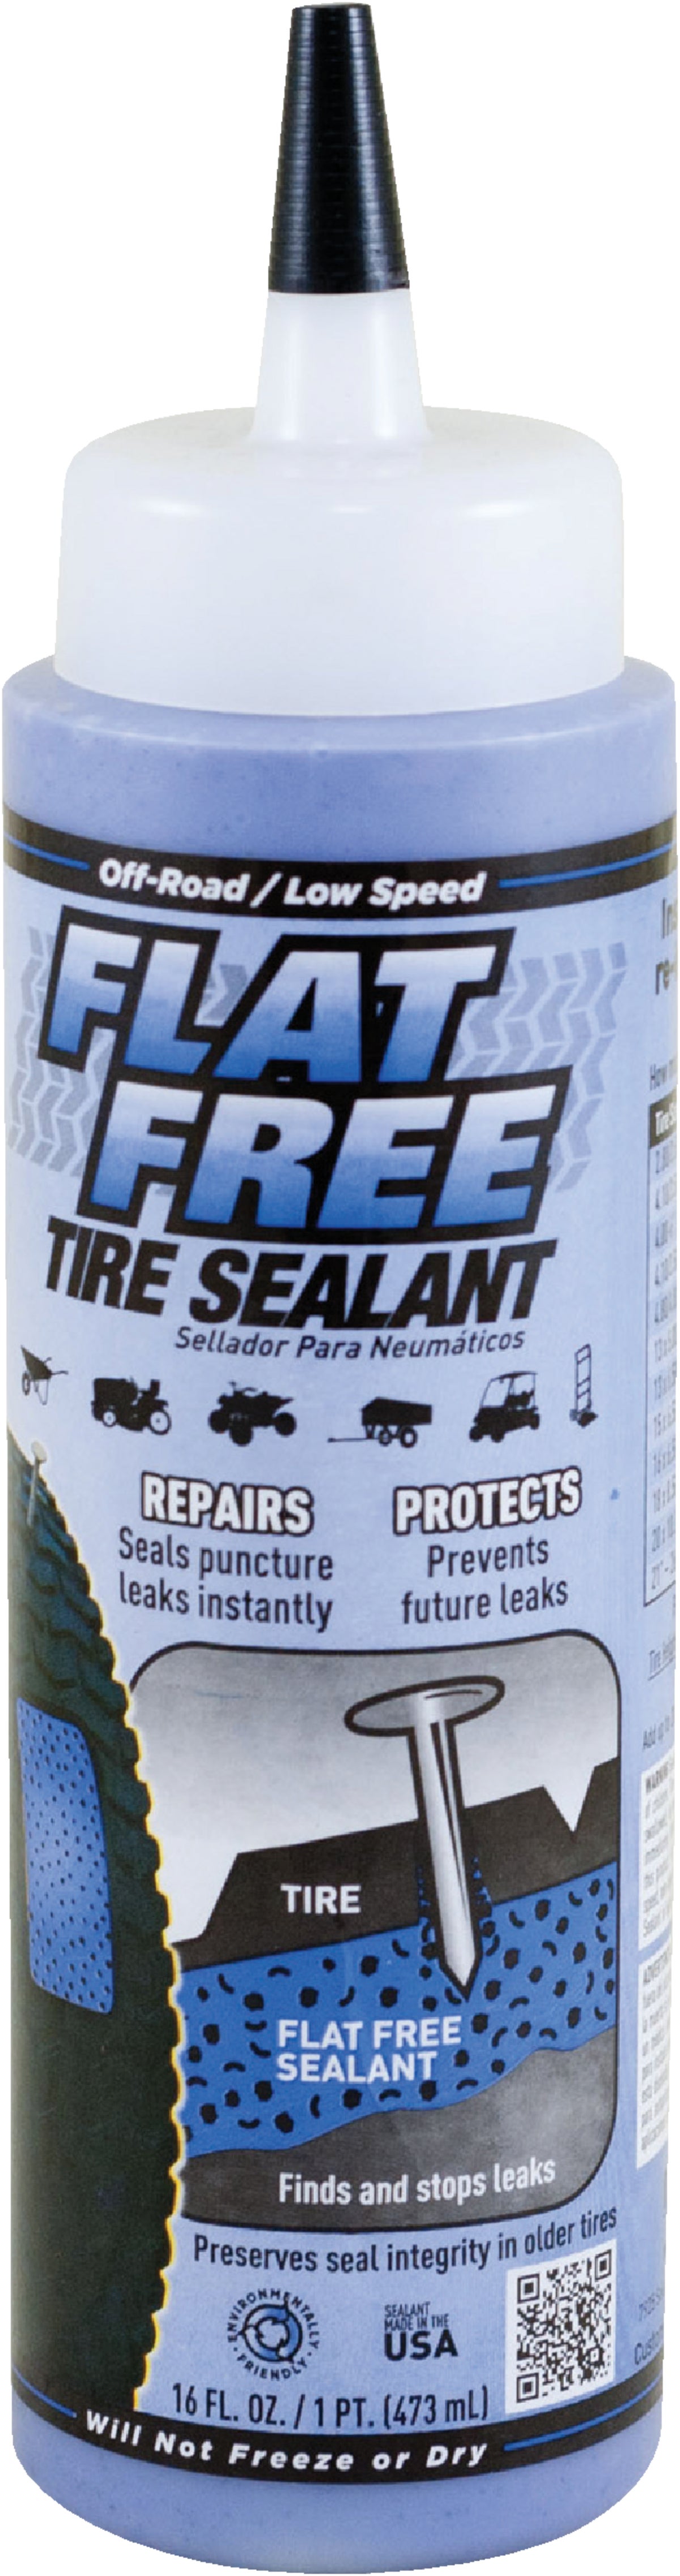 Fix-A-Flat Tire Puncture Sealer and Inflator 16 Oz.